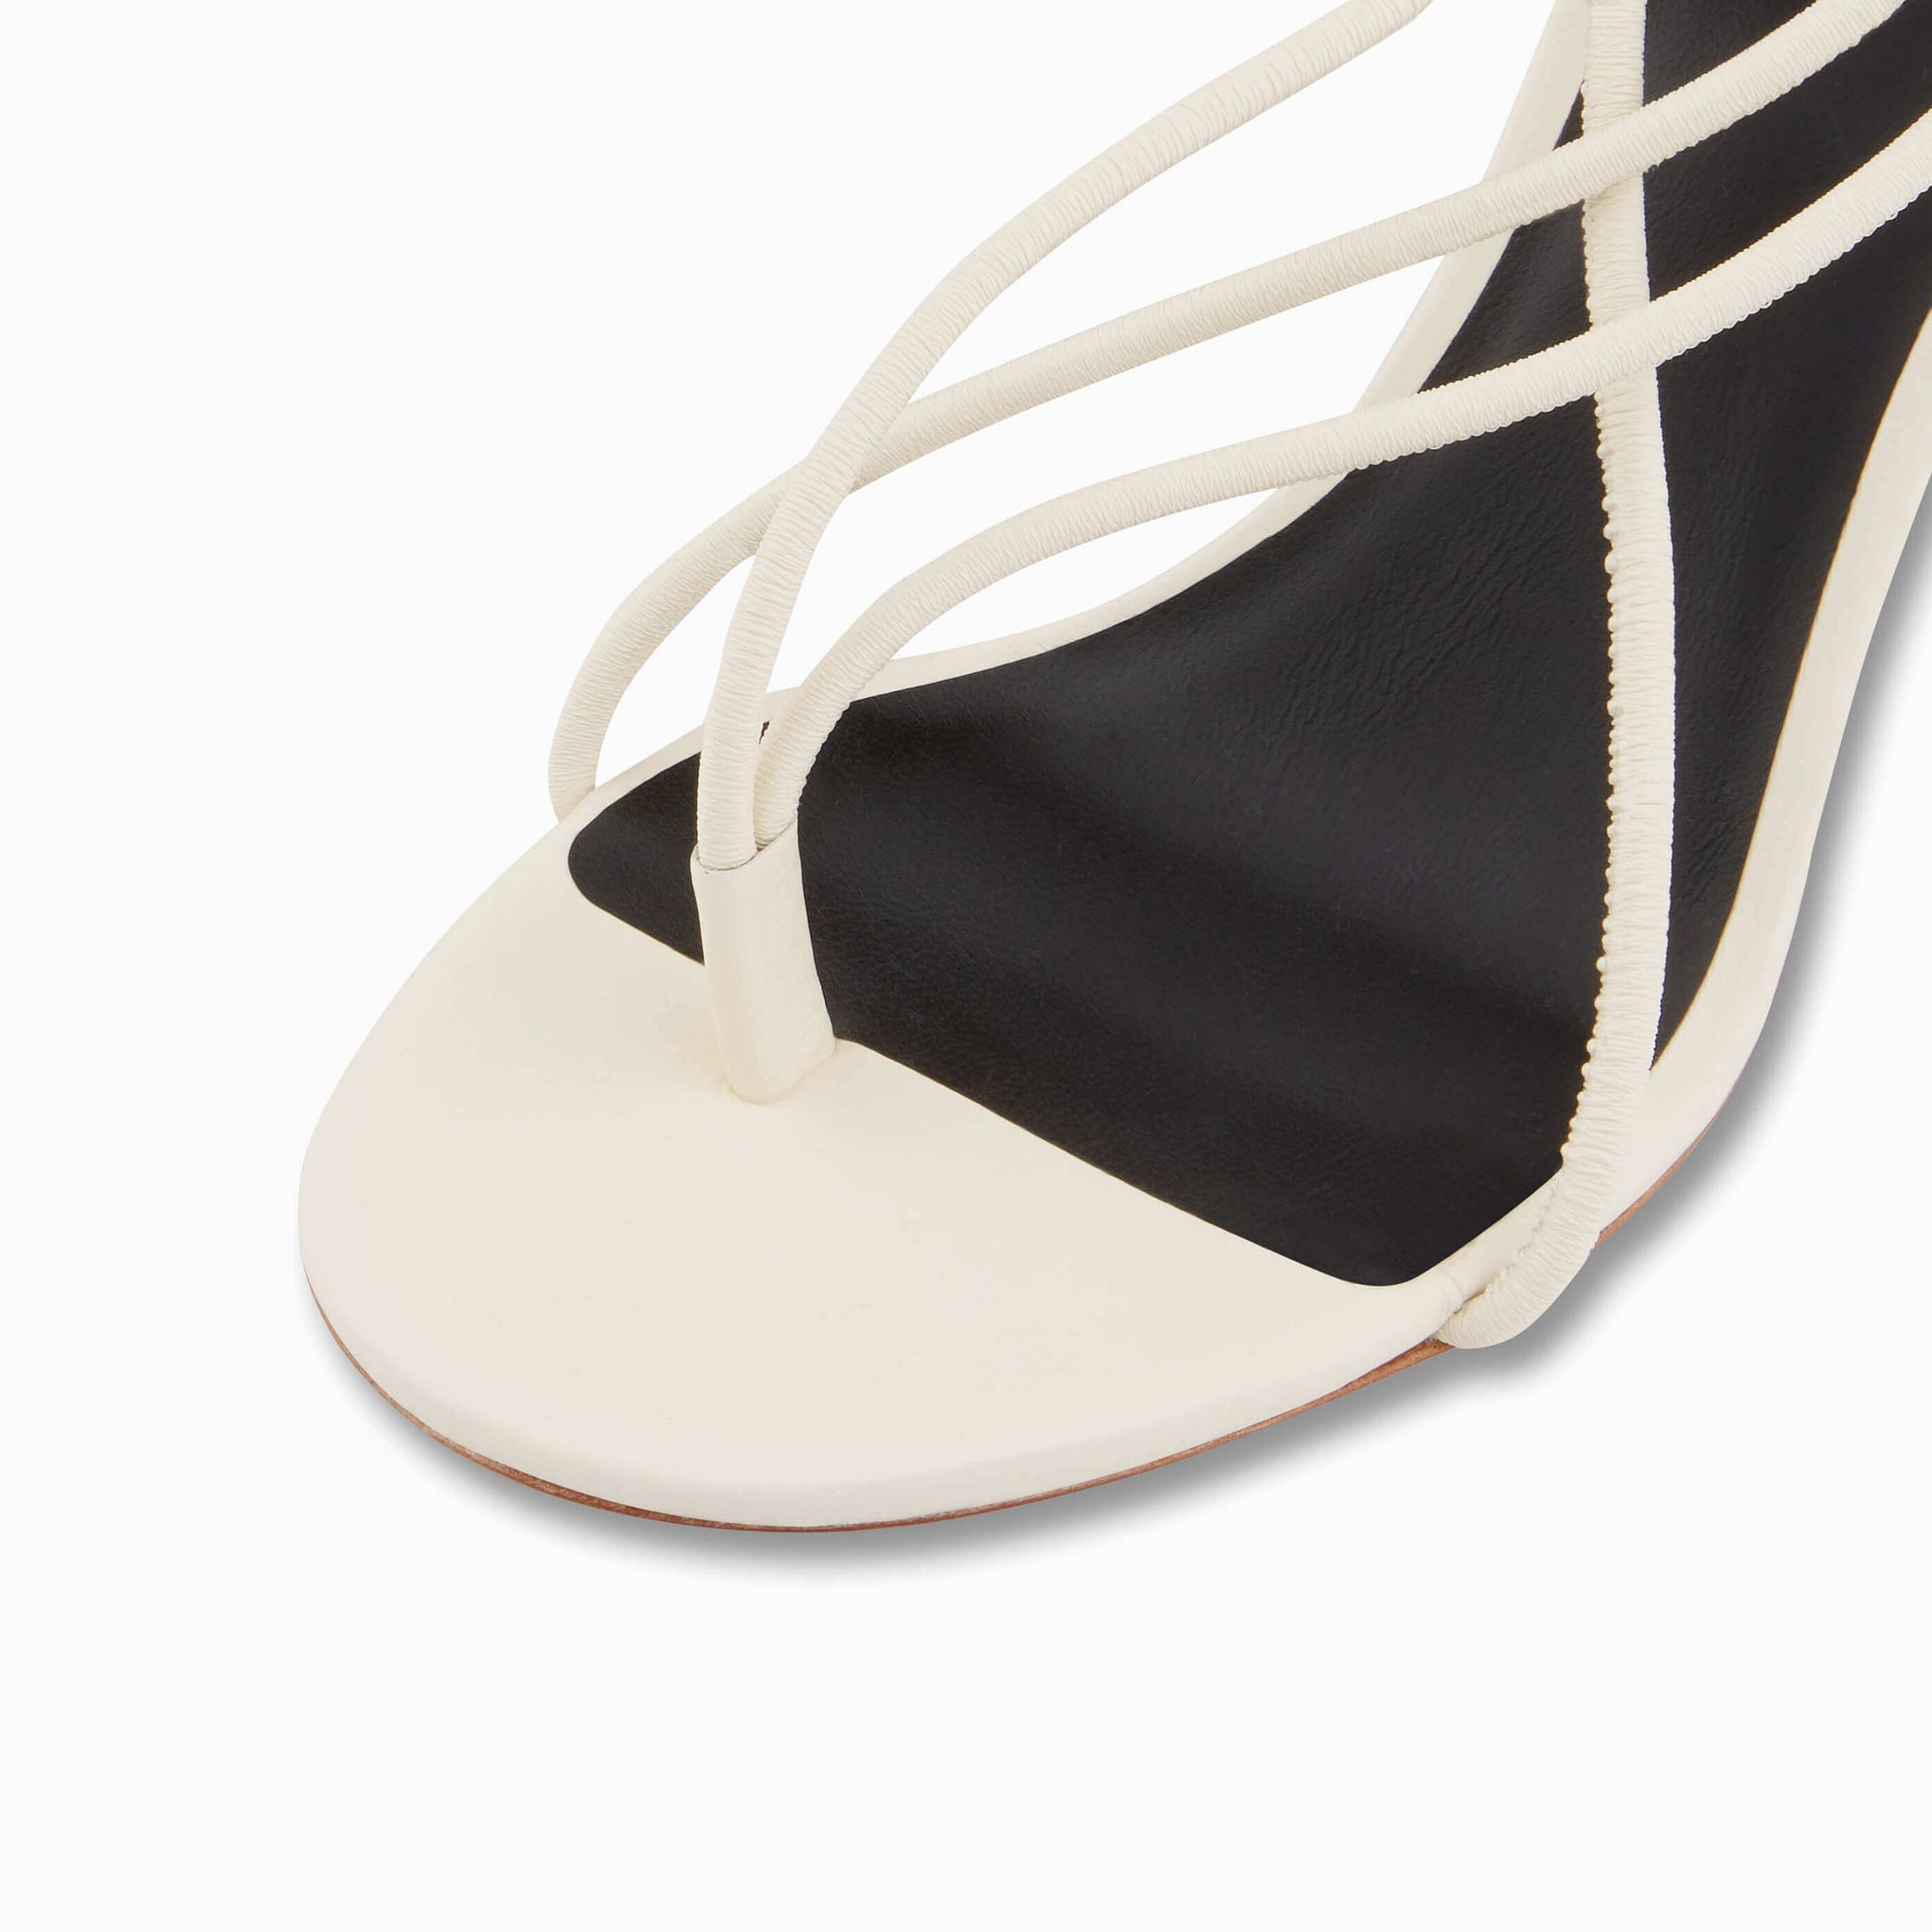 Neous Gloas Slingback Sandal in Cream available at TNT The New Trend Australia.